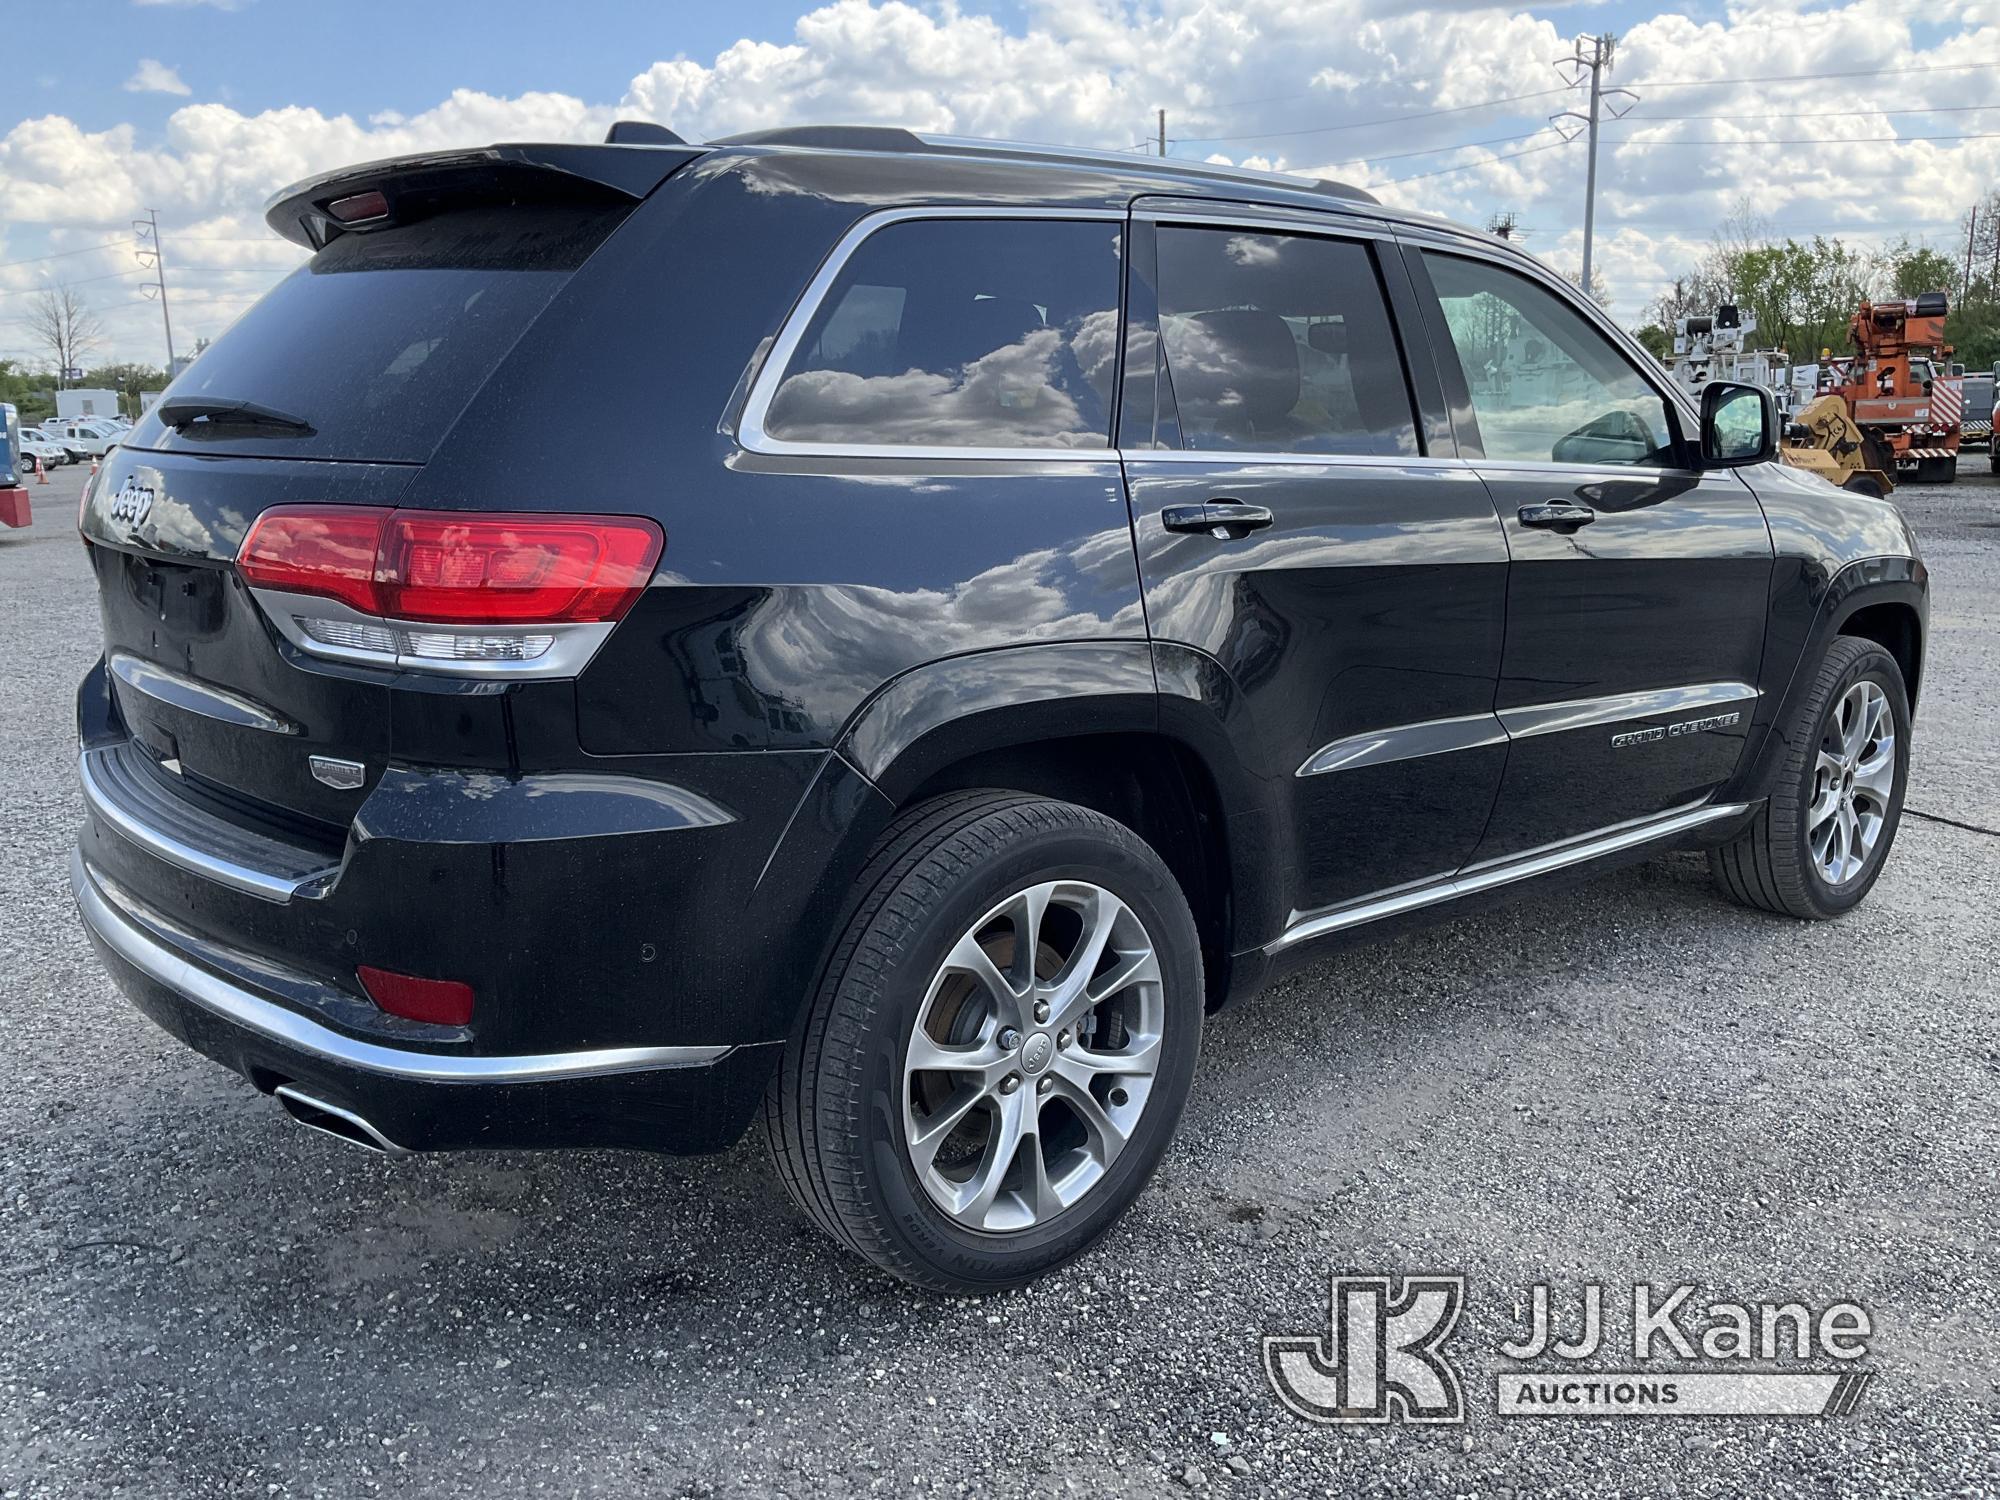 (Plymouth Meeting, PA) 2019 Jeep Grand Cherokee 4x4 4-Door Sport Utility Vehicle Runs & Moves, Body